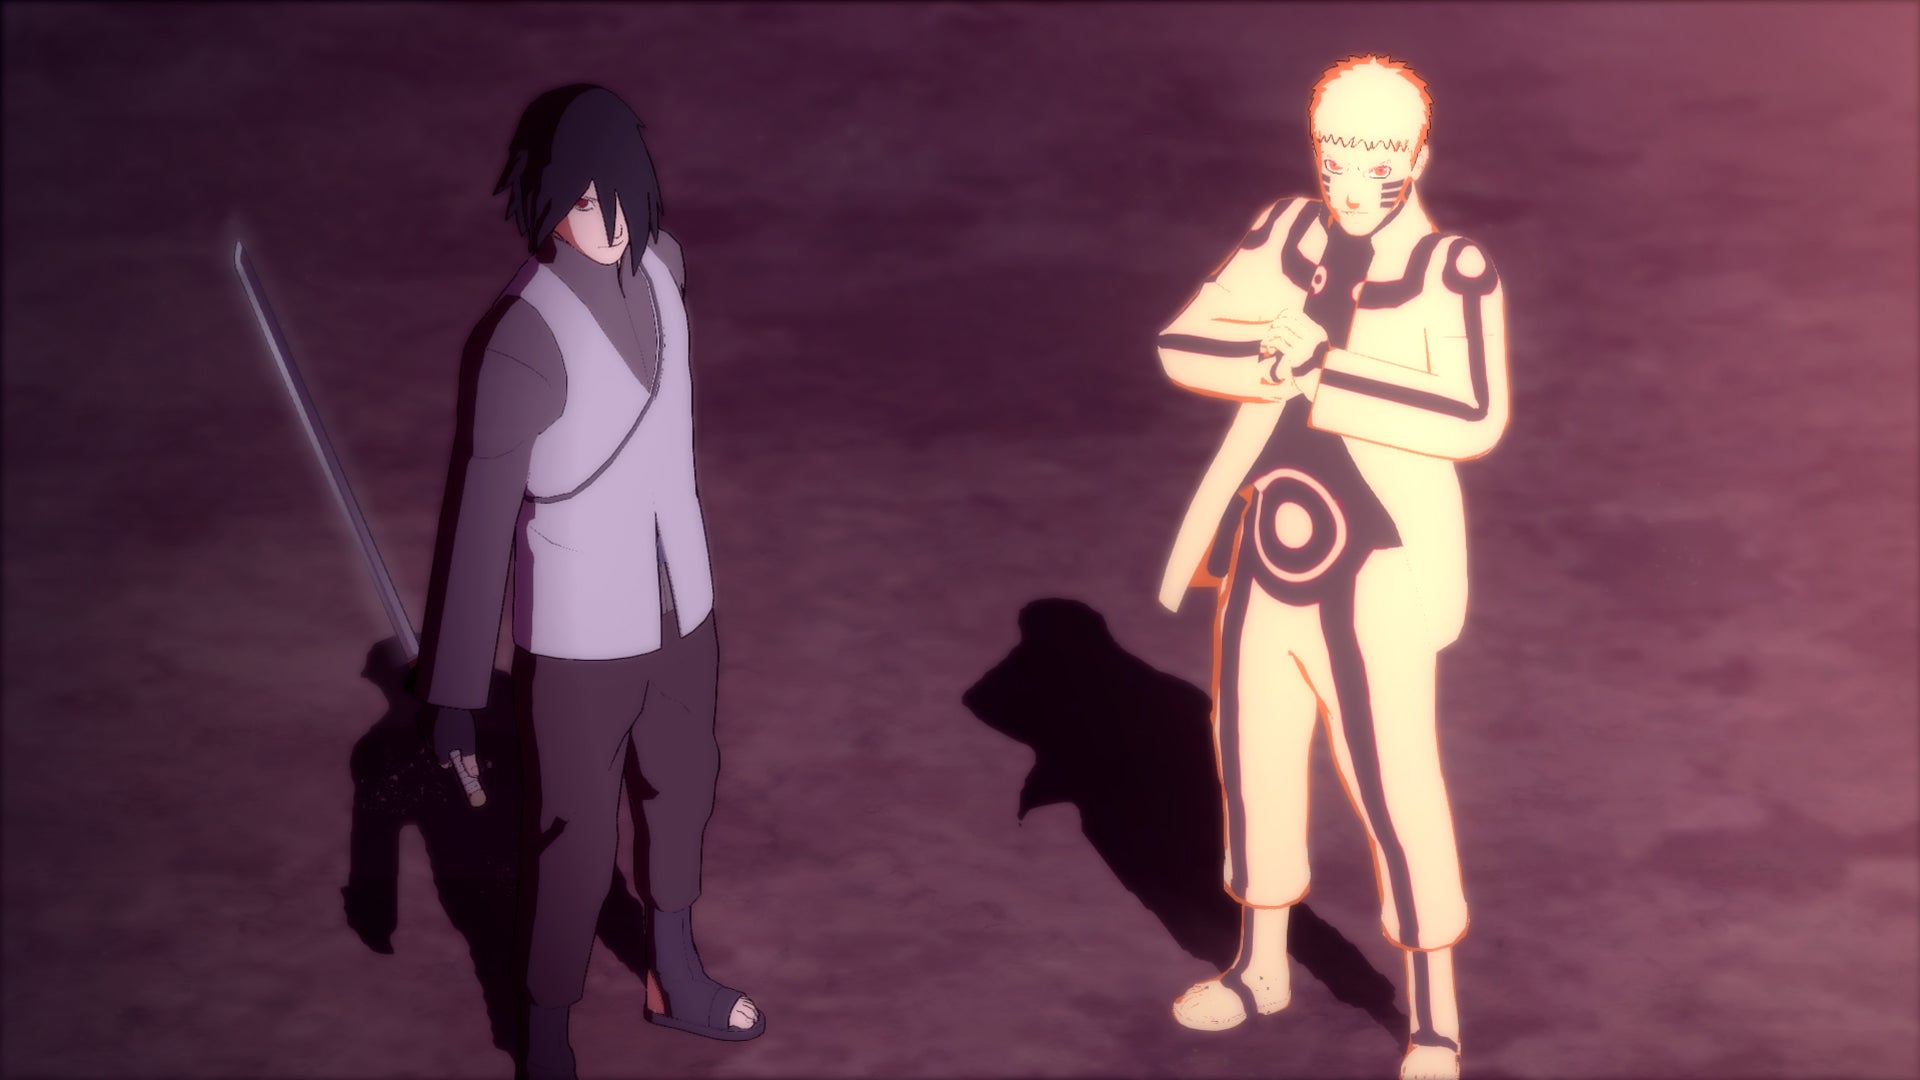 Screenshot from Naruto video game featuring two characters.